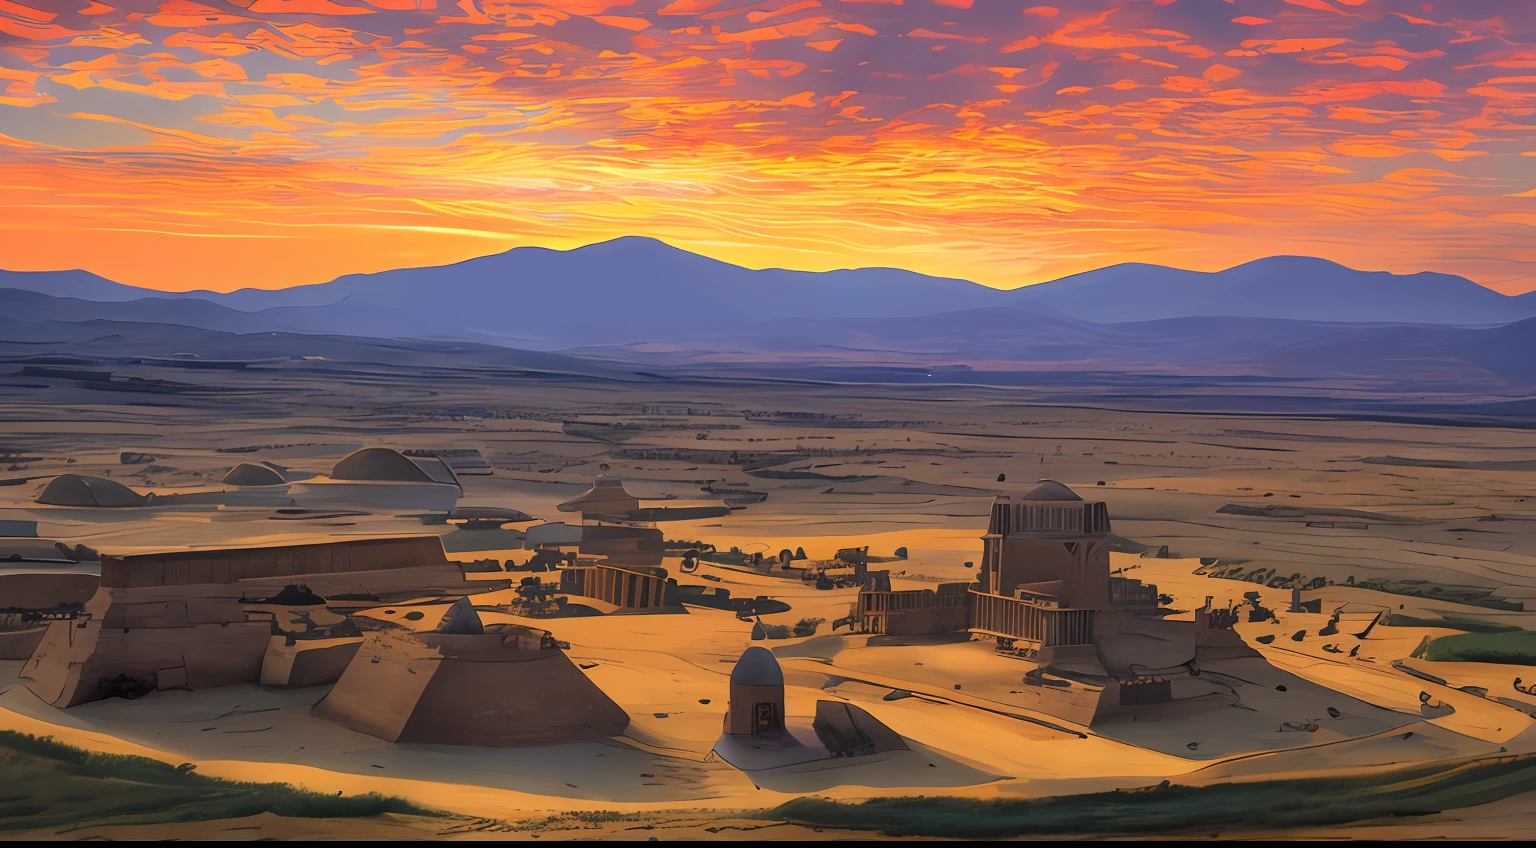 An empire of more than seven hundred years, Axum Africa, stunning photographic view of the sunset landscape, master part, trending in cgsociety, 4k, 8k, disco Rigido, [art-station:1], arte conceitual, altamente detalhado, foco nítido, [Subsurface scattering:1], art by Gabriel Lekegian and Abbas domains of Axum during the Middle Ages and early Modern Ages